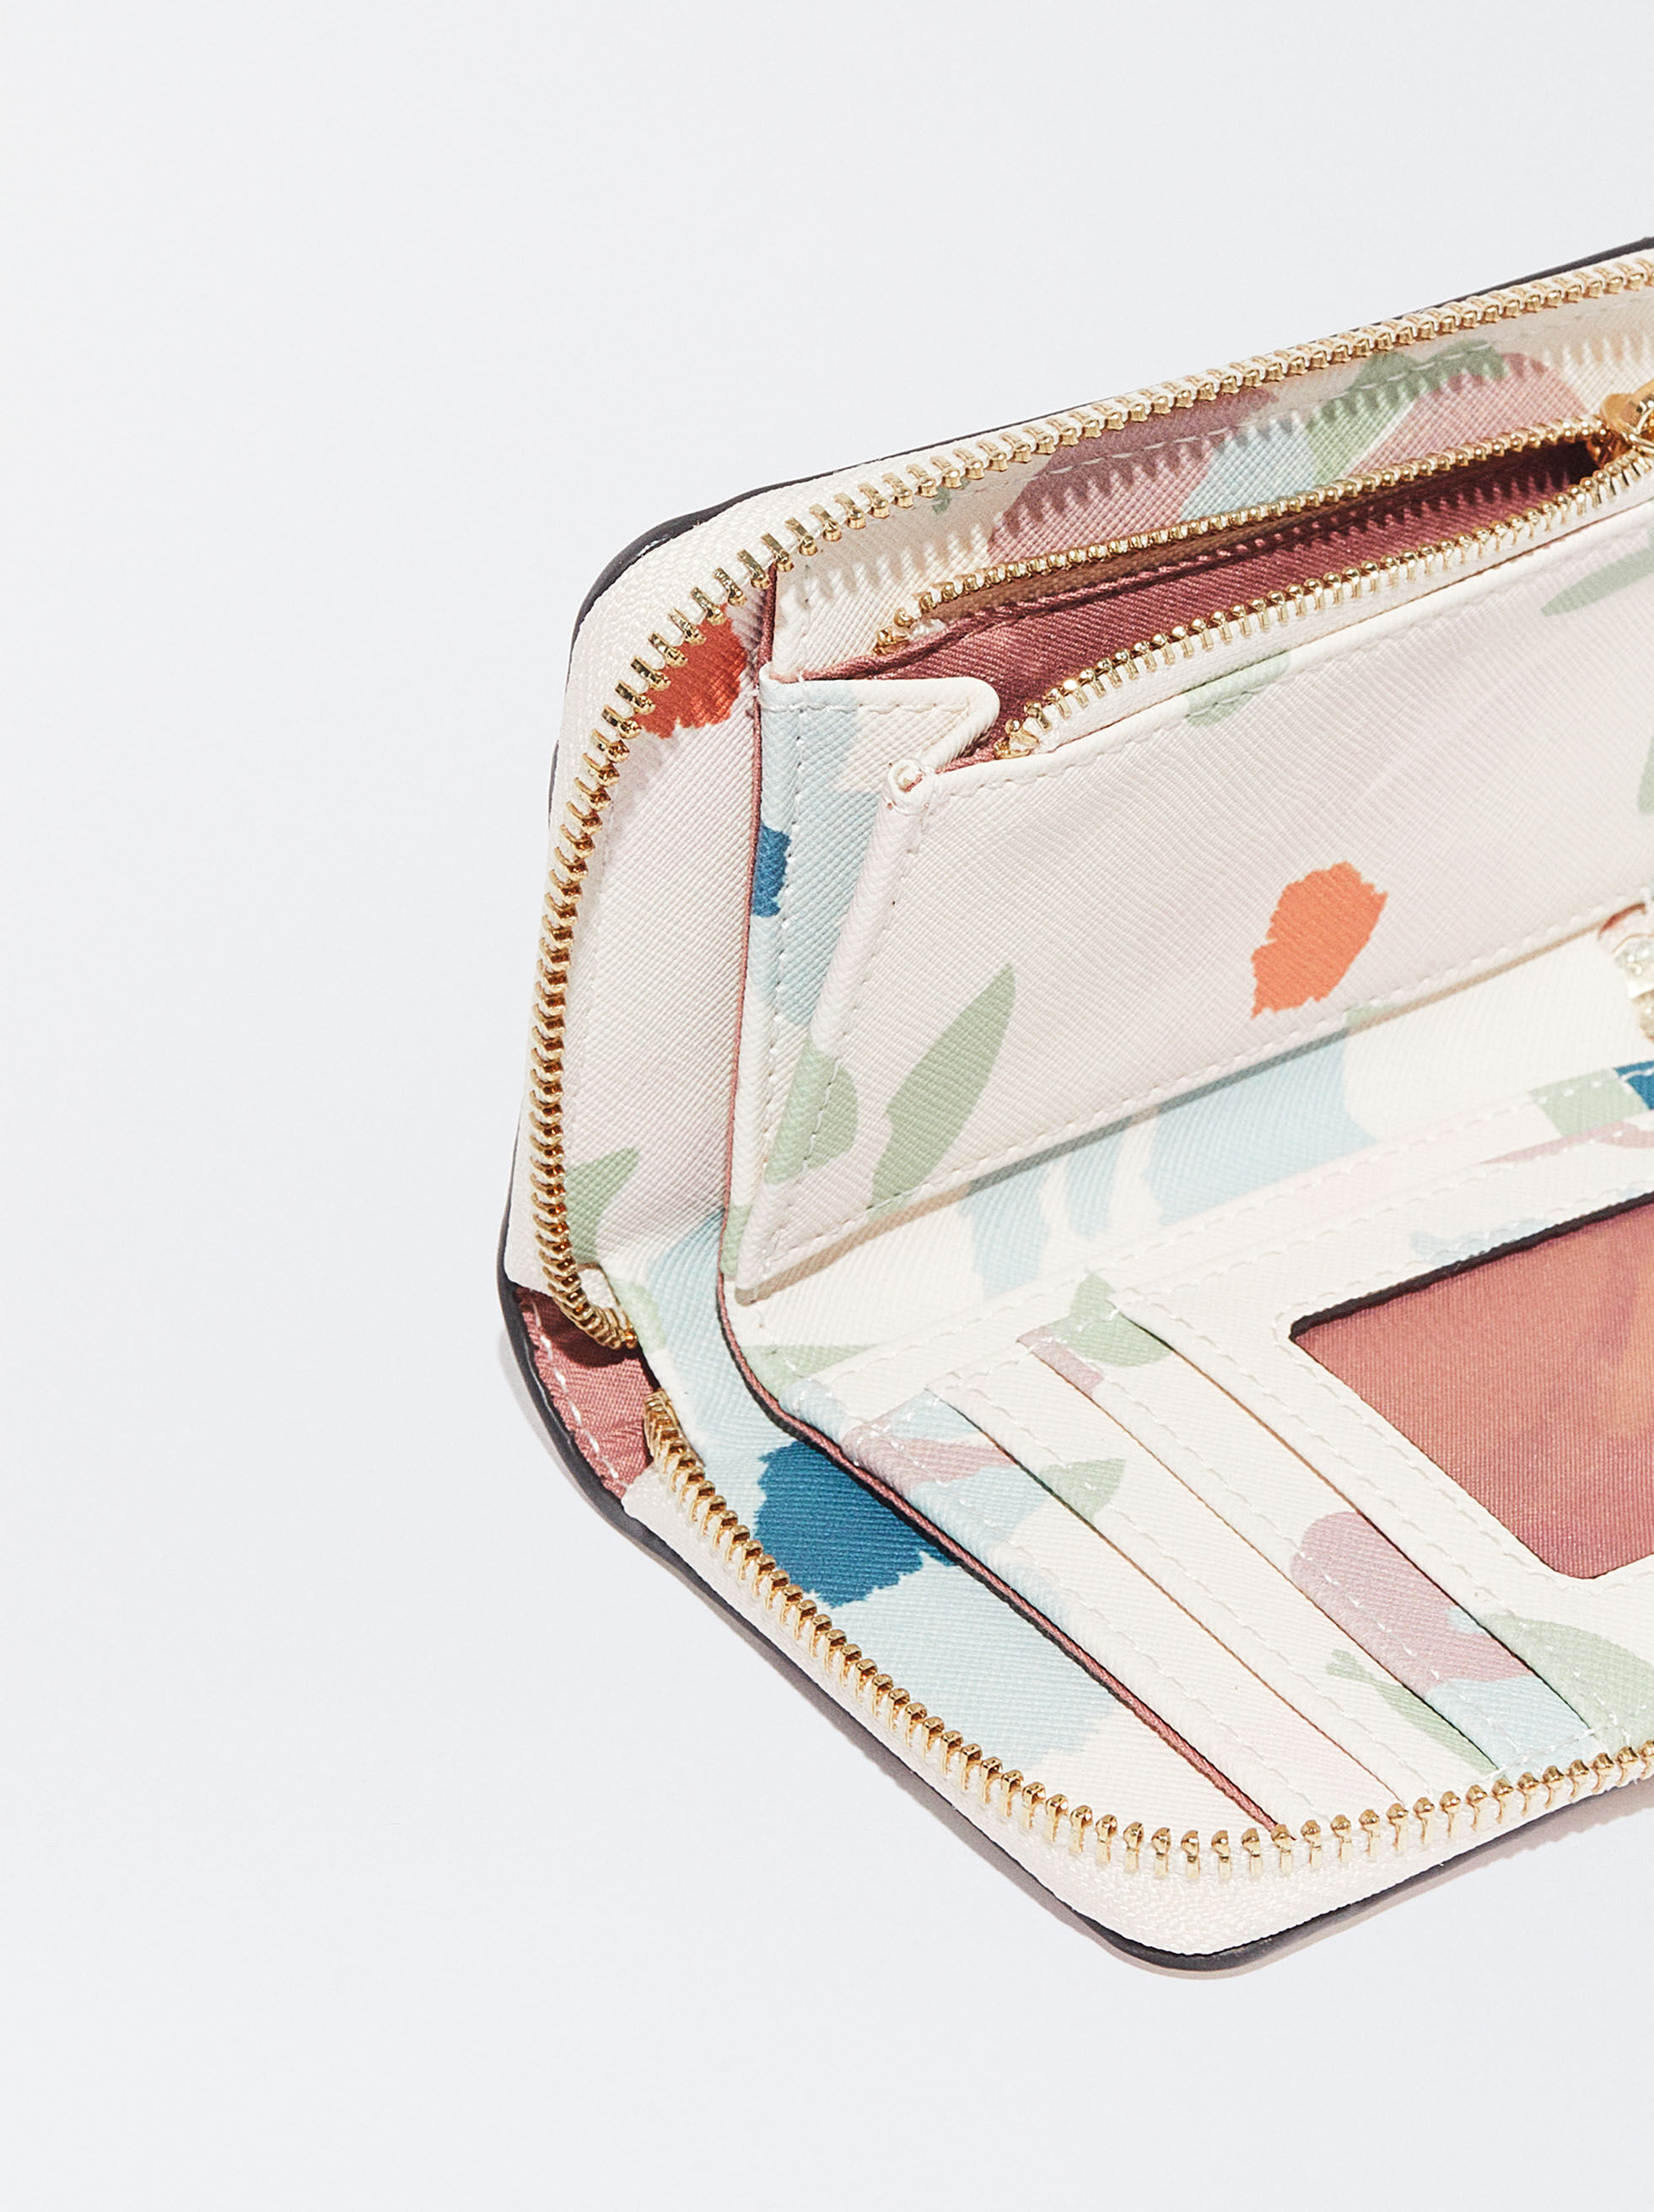 16 Most Stylish And Useful Bags To Buy At Target 2022